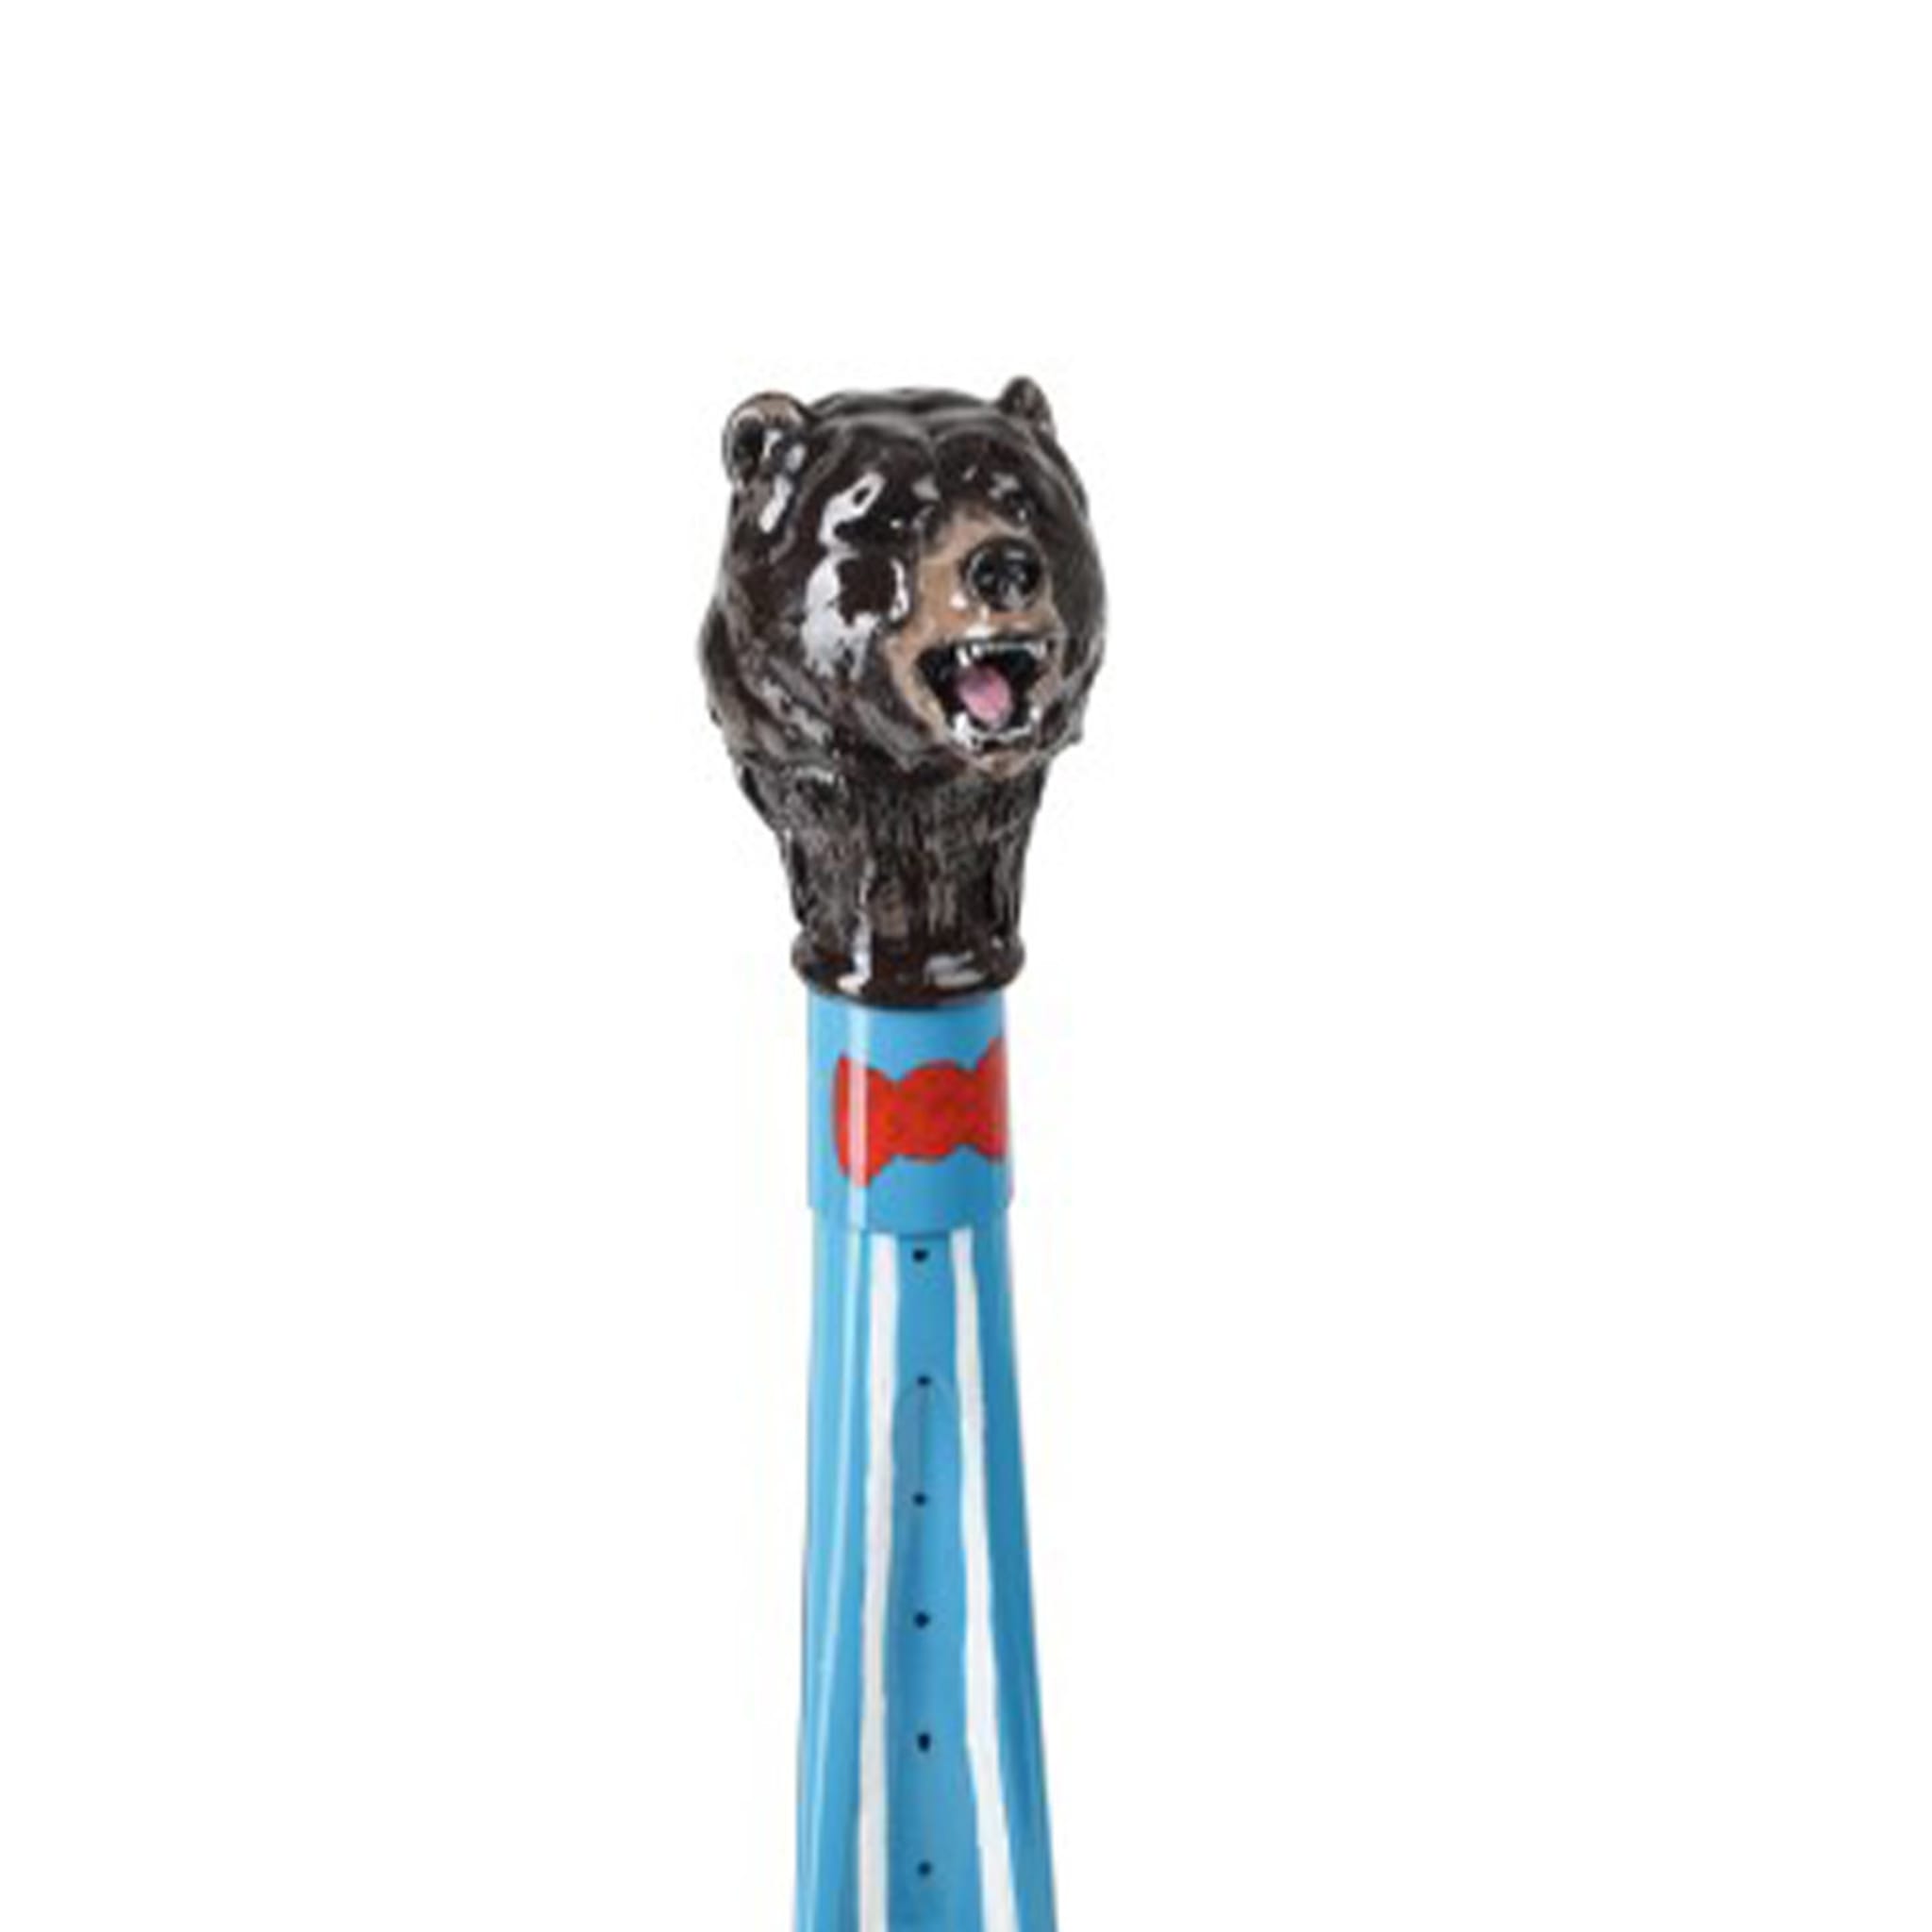 Orso Small Zoomorphic Shoehorn - Alternative view 1